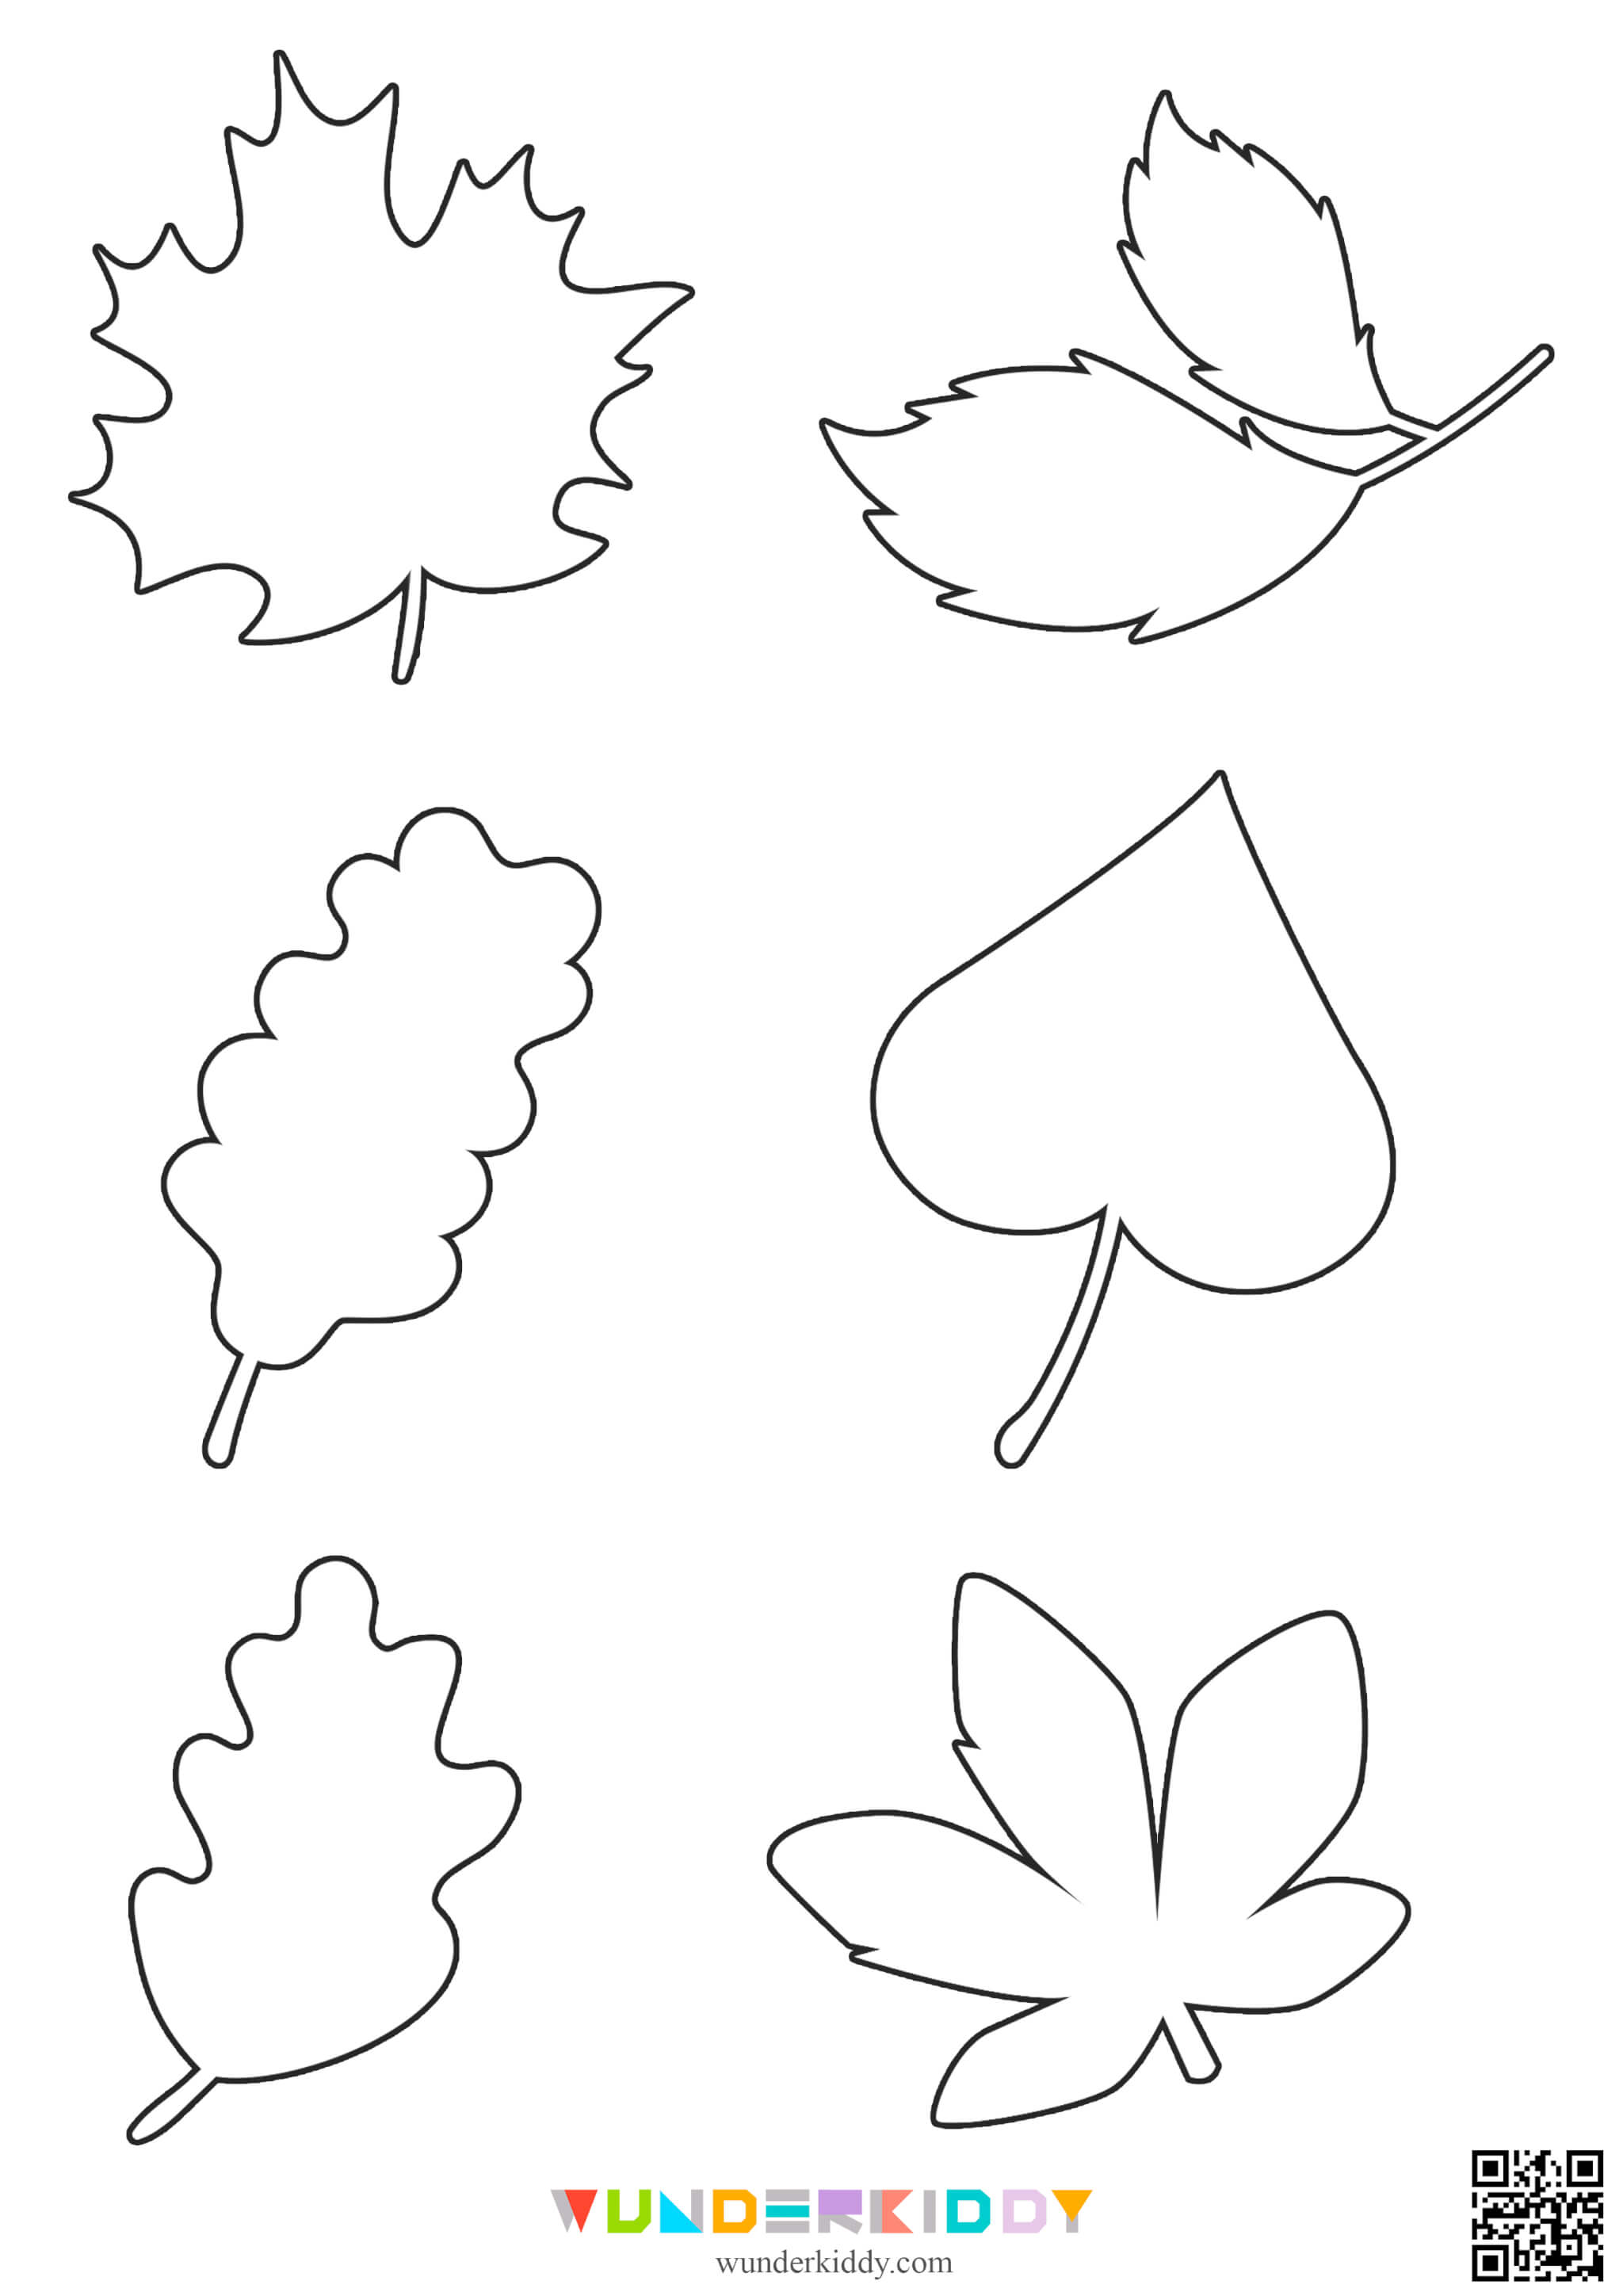 Autumn Leaves Free Outline Templates - Image 5